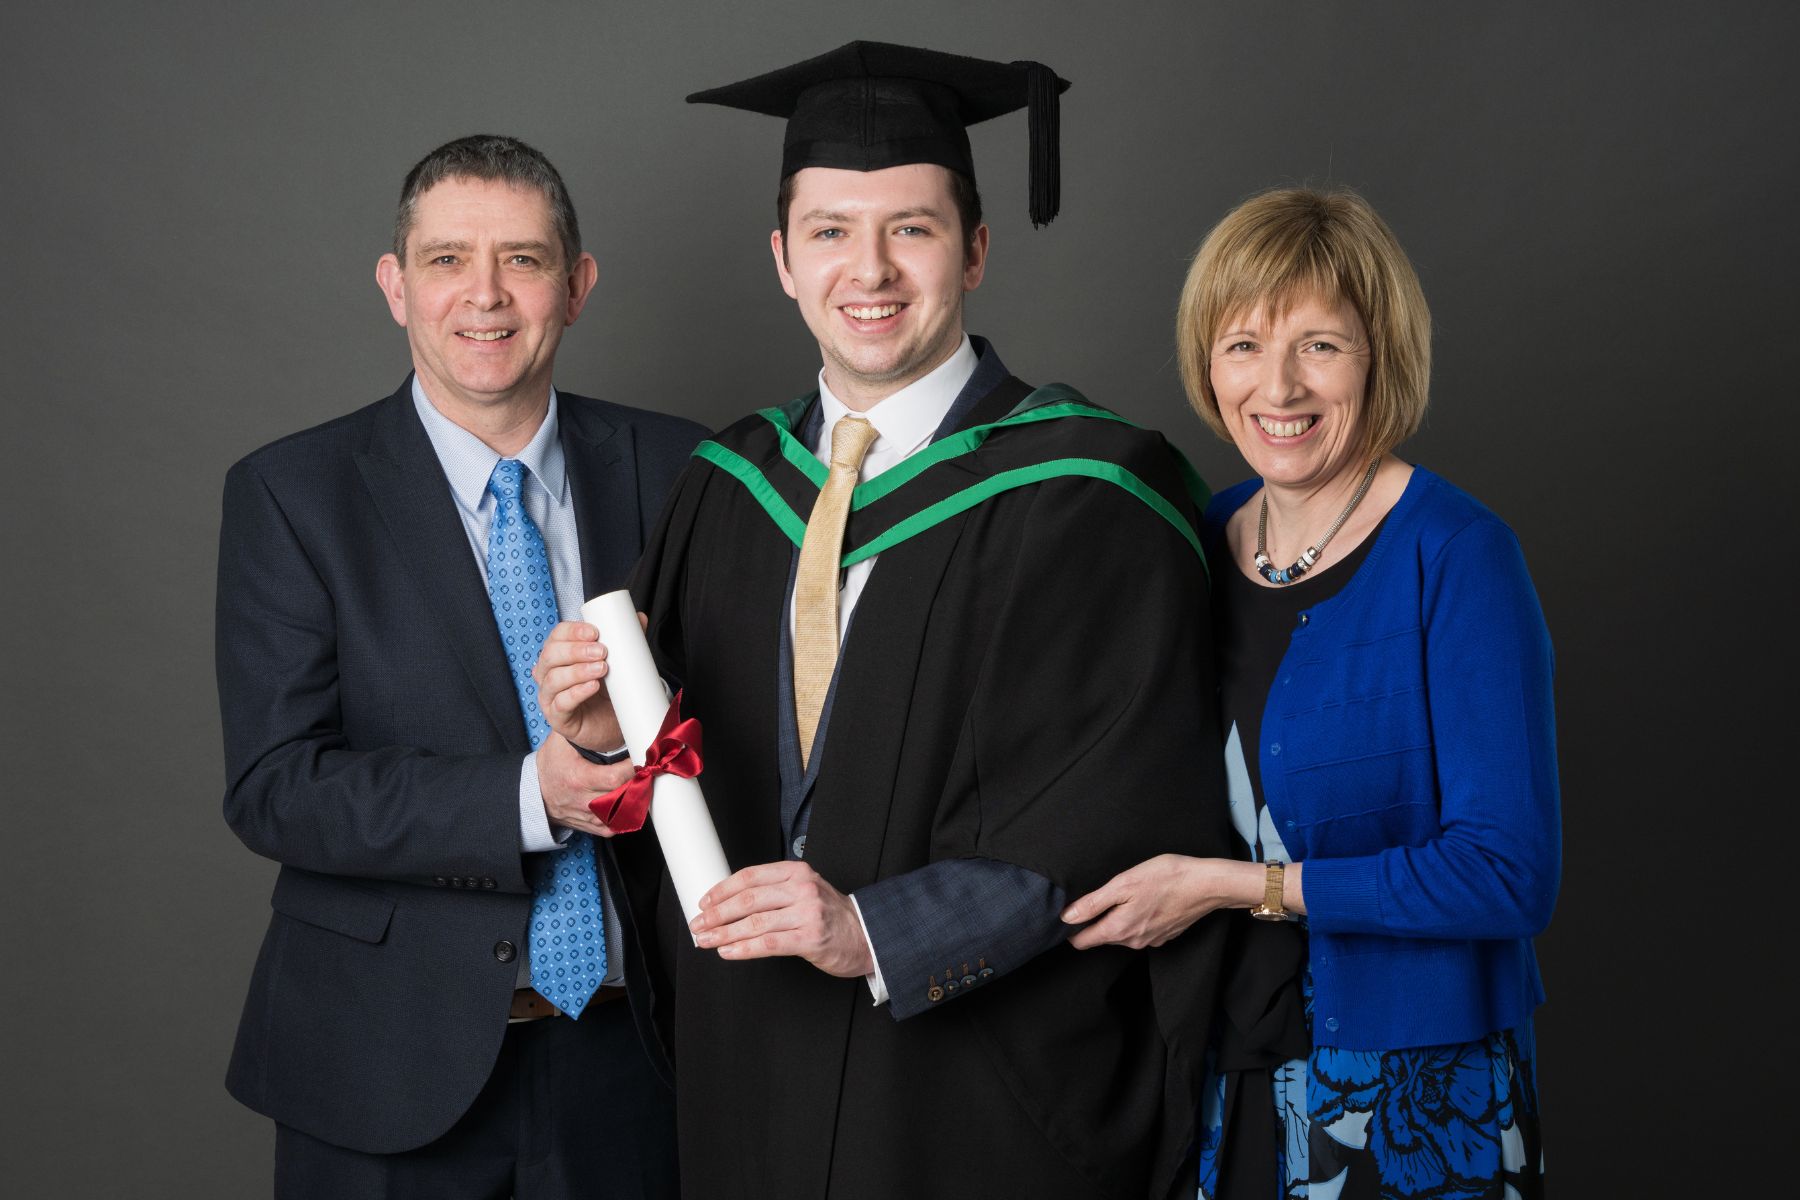 Graduation Photographs with Family